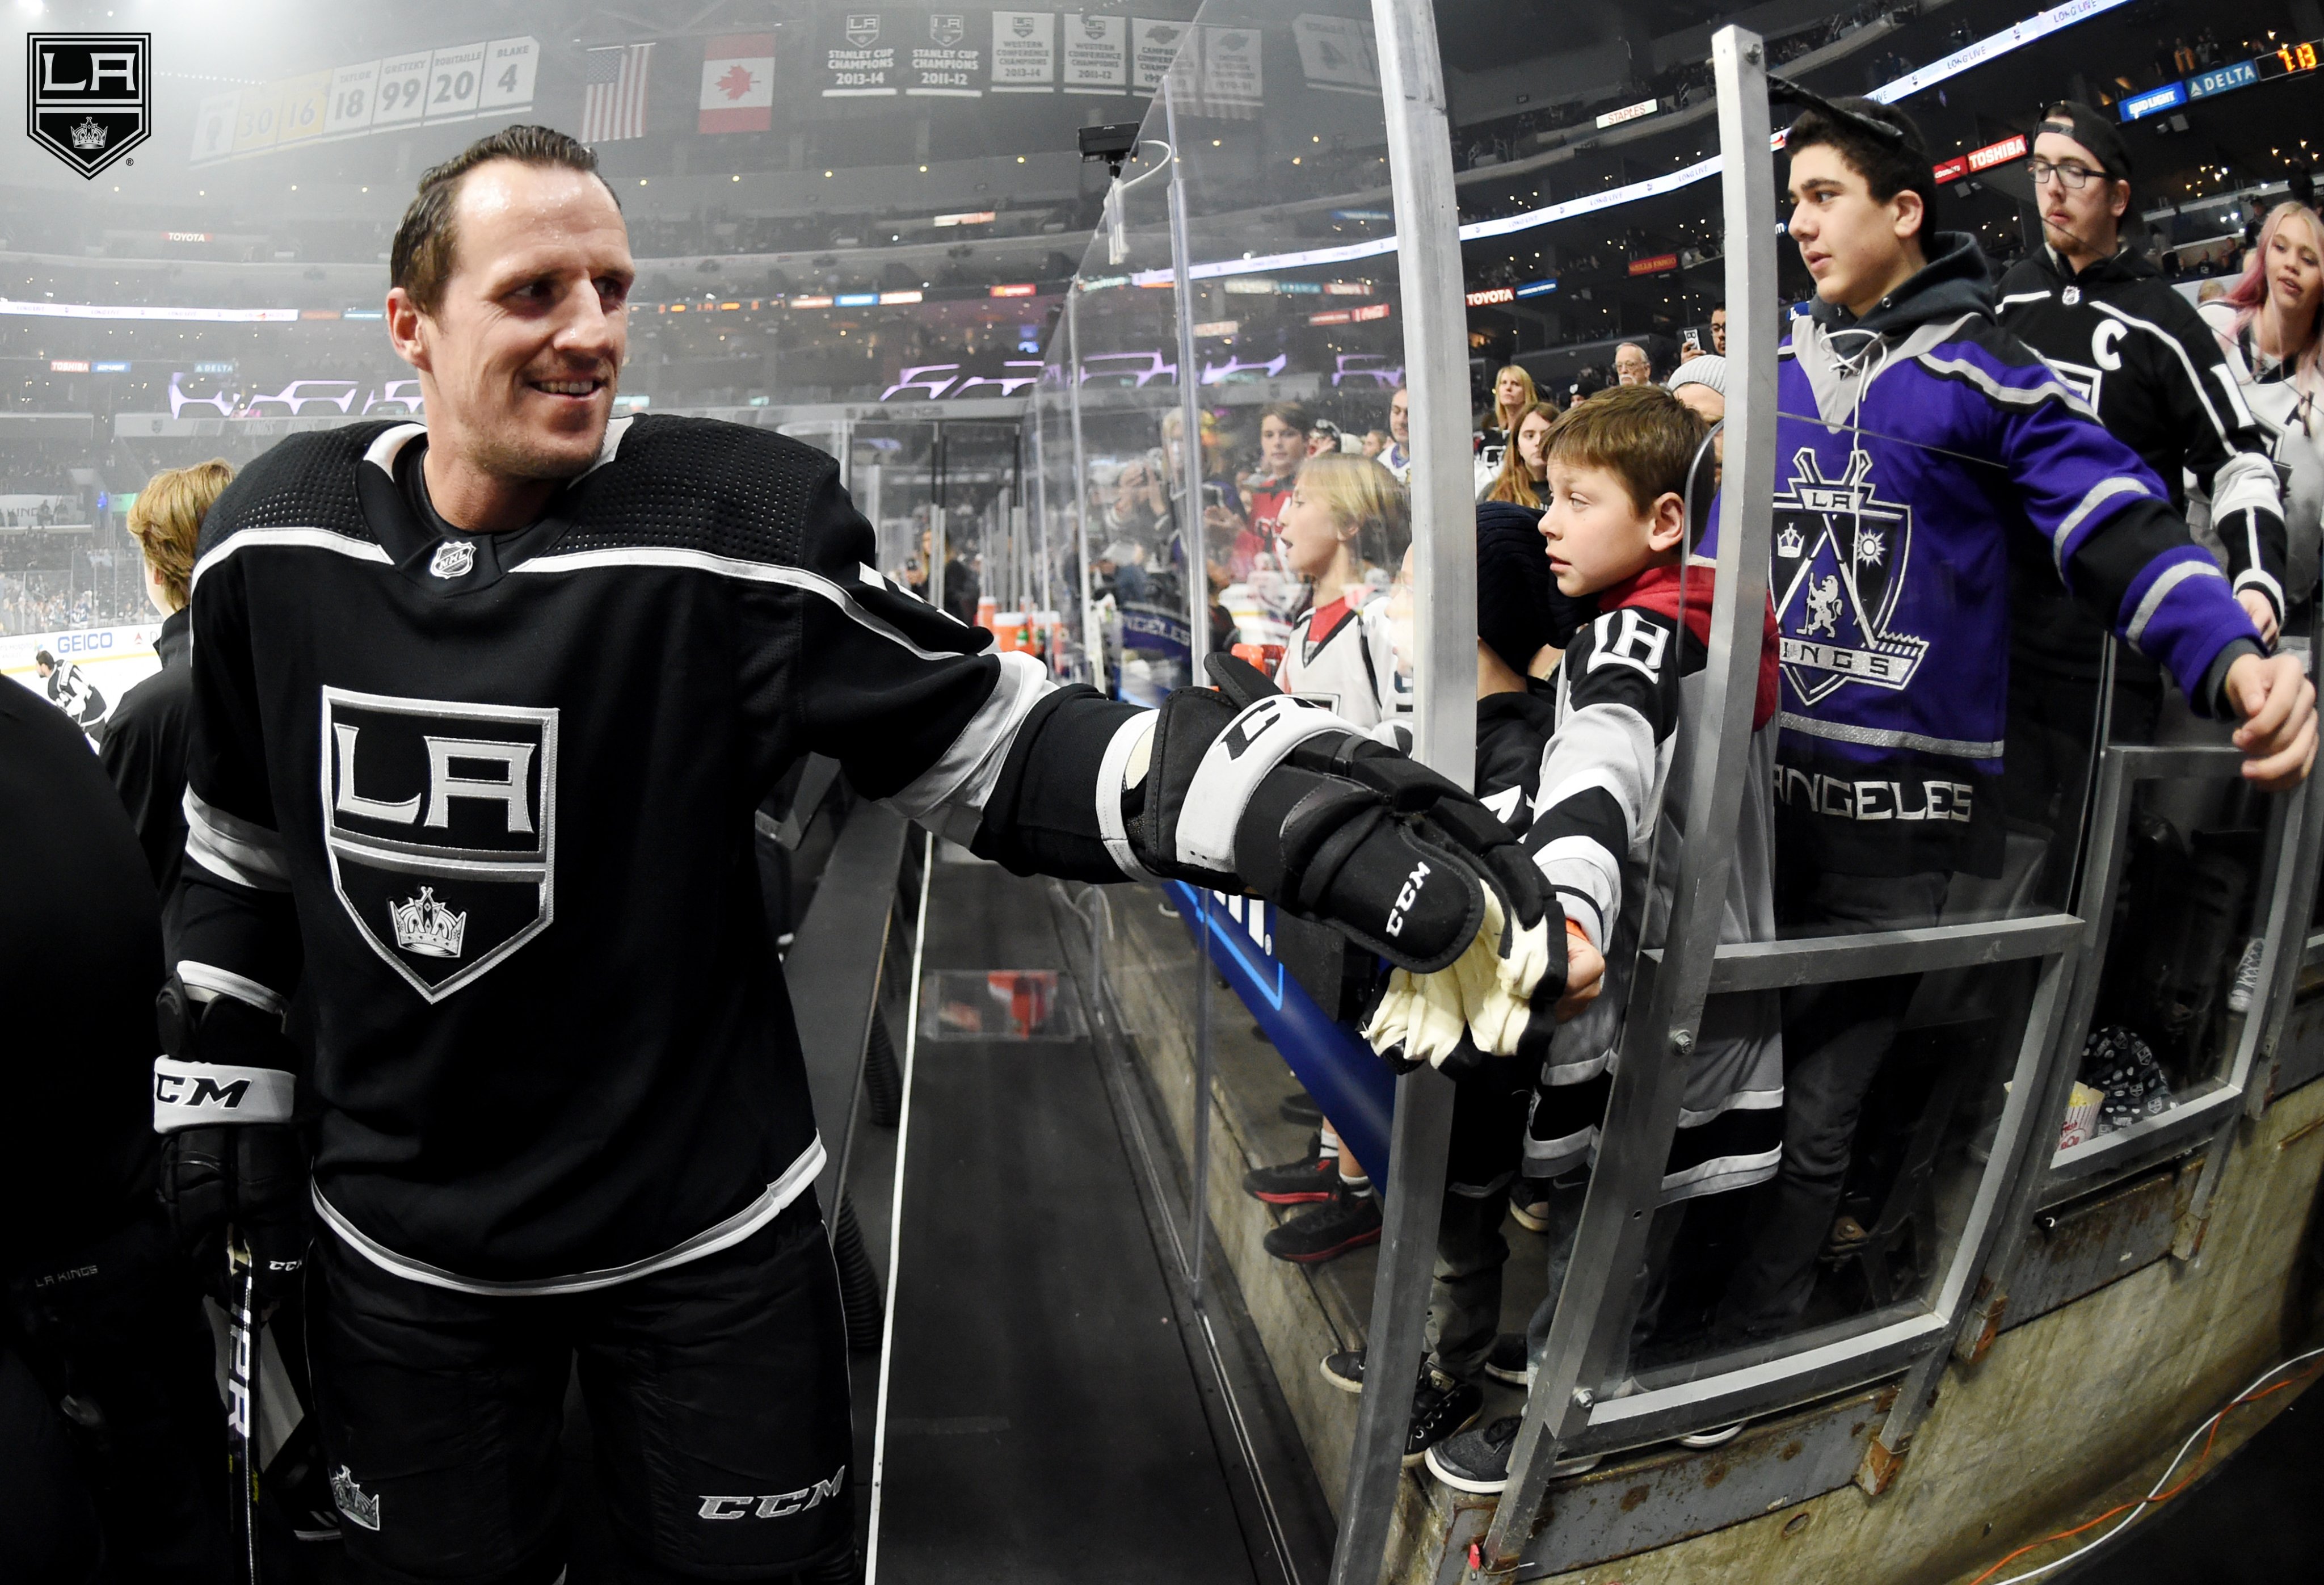 LA Kings on X: Congratulations to our friend Dion Phaneuf on his  retirement. Dion celebrated his 1000th career @NHL game with the LA Kings,  where he always represented our hockey club with